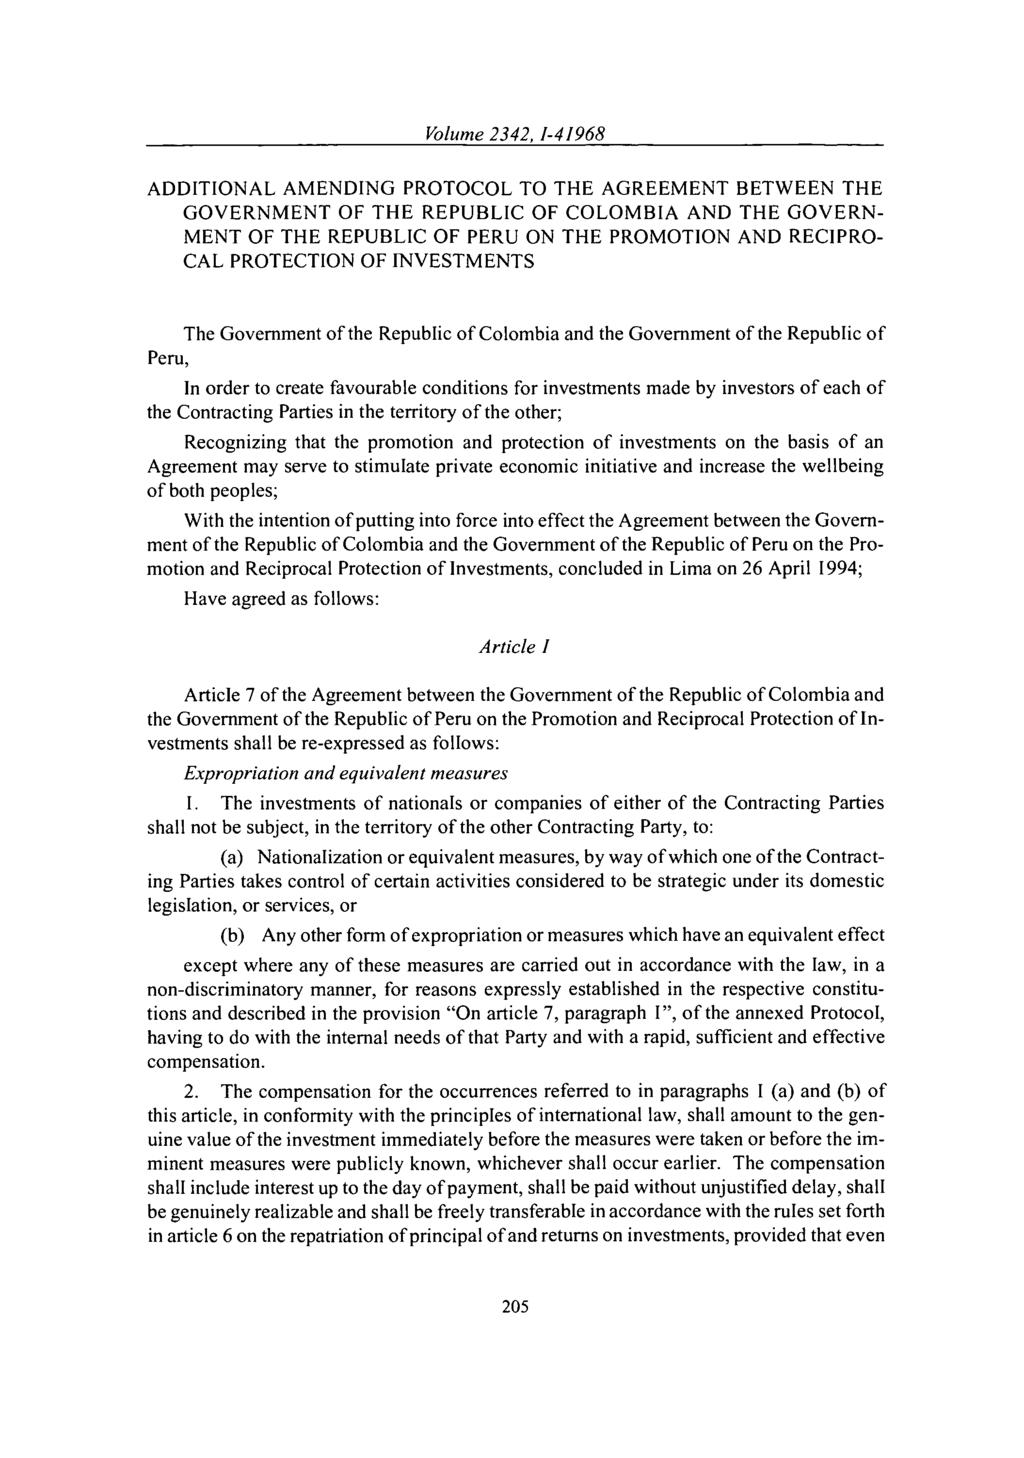 ADDITIONAL AMENDING PROTOCOL TO THE AGREEMENT BETWEEN THE GOVERNMENT OF THE REPUBLIC OF COLOMBIA AND THE GOVERN- MENT OF THE REPUBLIC OF PERU ON THE PROMOTION AND RECIPRO- CAL PROTECTION OF